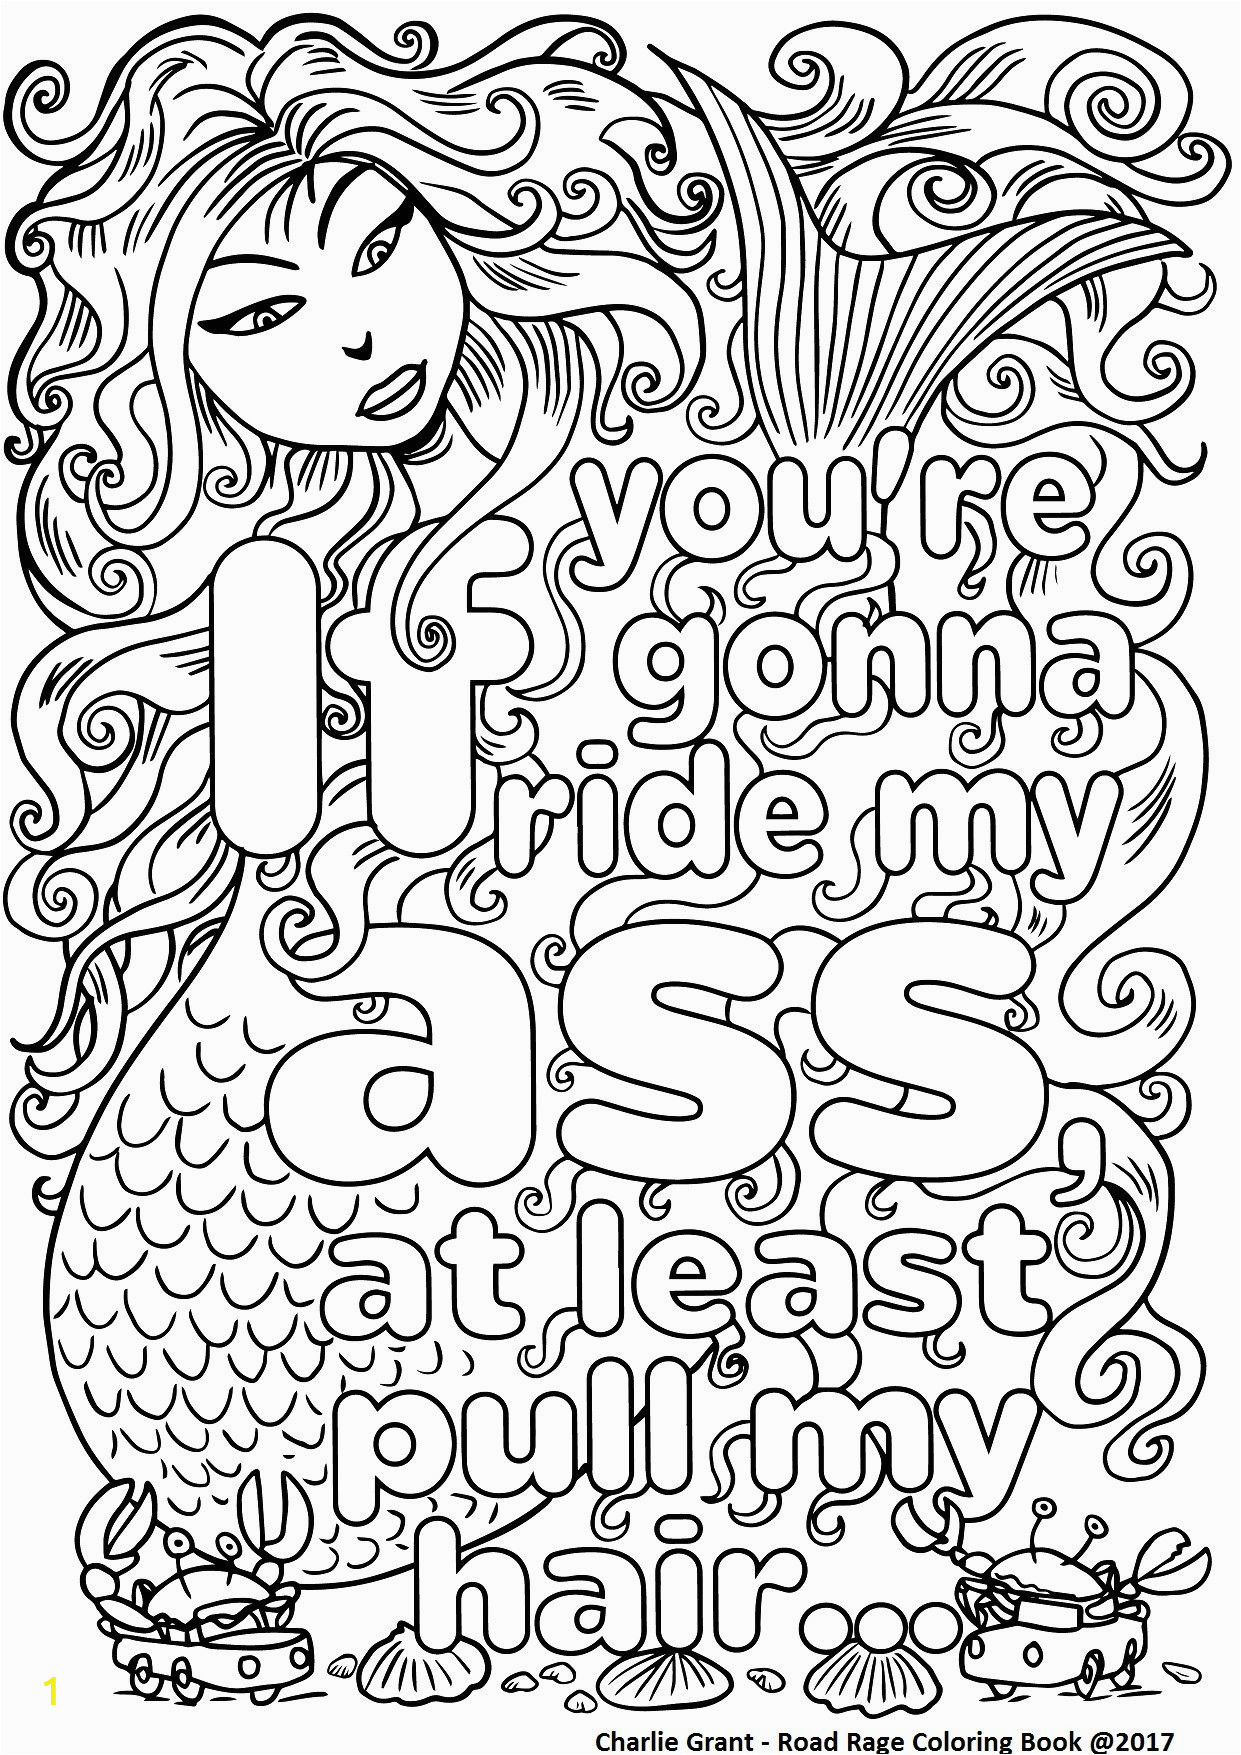 Free Printable Coloring Pages for Adults Swear Words Trippy Curse Words Coloring Pages for Adults to Print